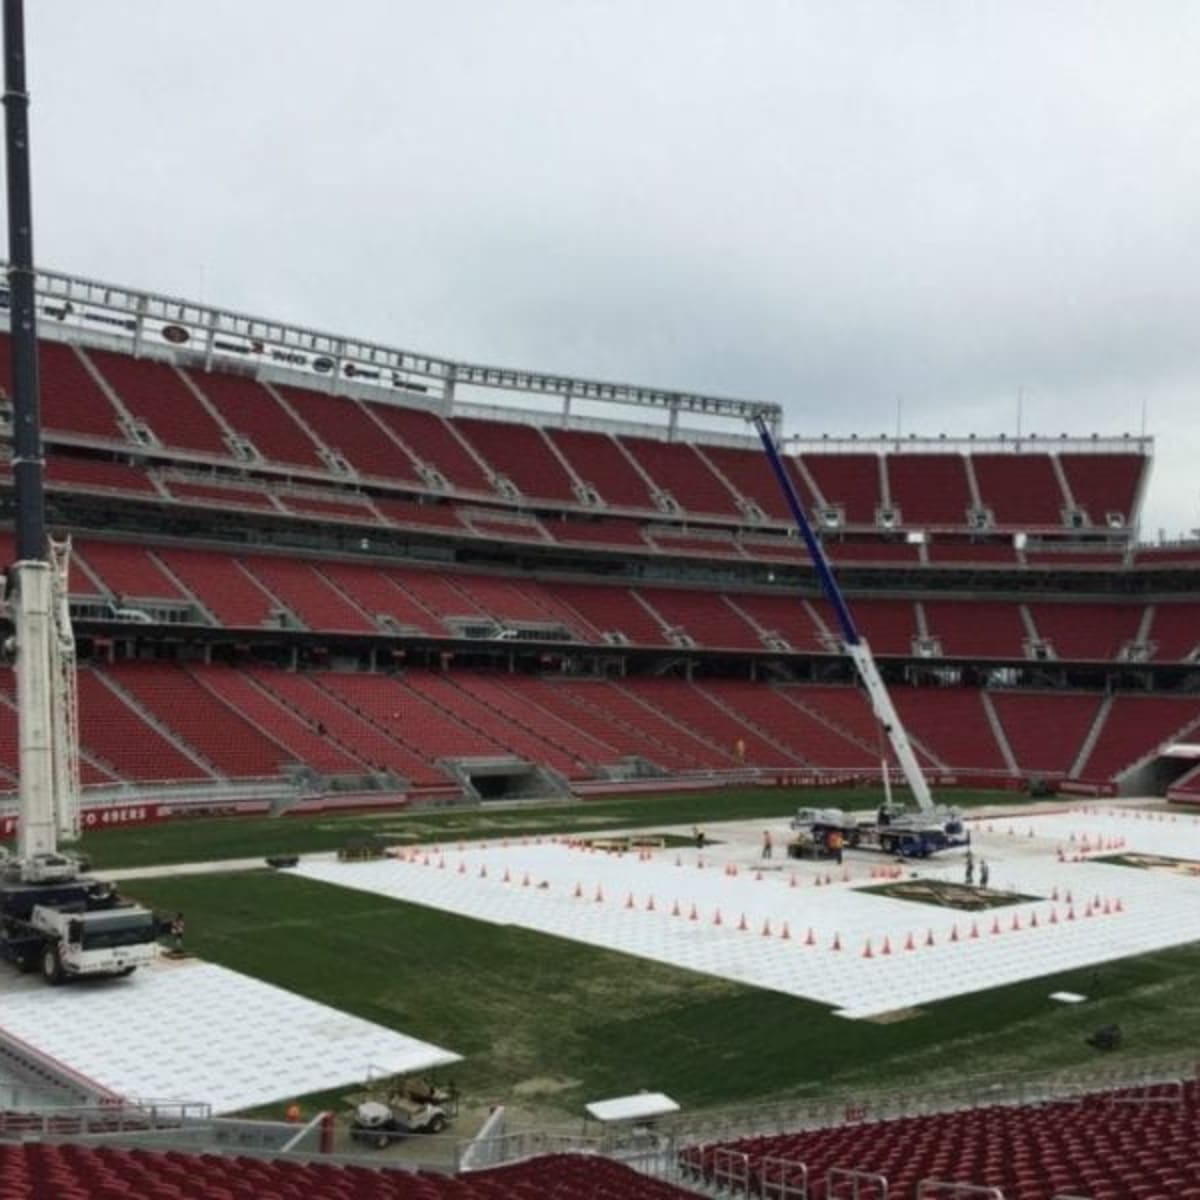 PHOTOS: Levi's stadium being prepared for WrestleMania 31 - Wrestling News  | WWE and AEW Results, Spoilers, Rumors & Scoops